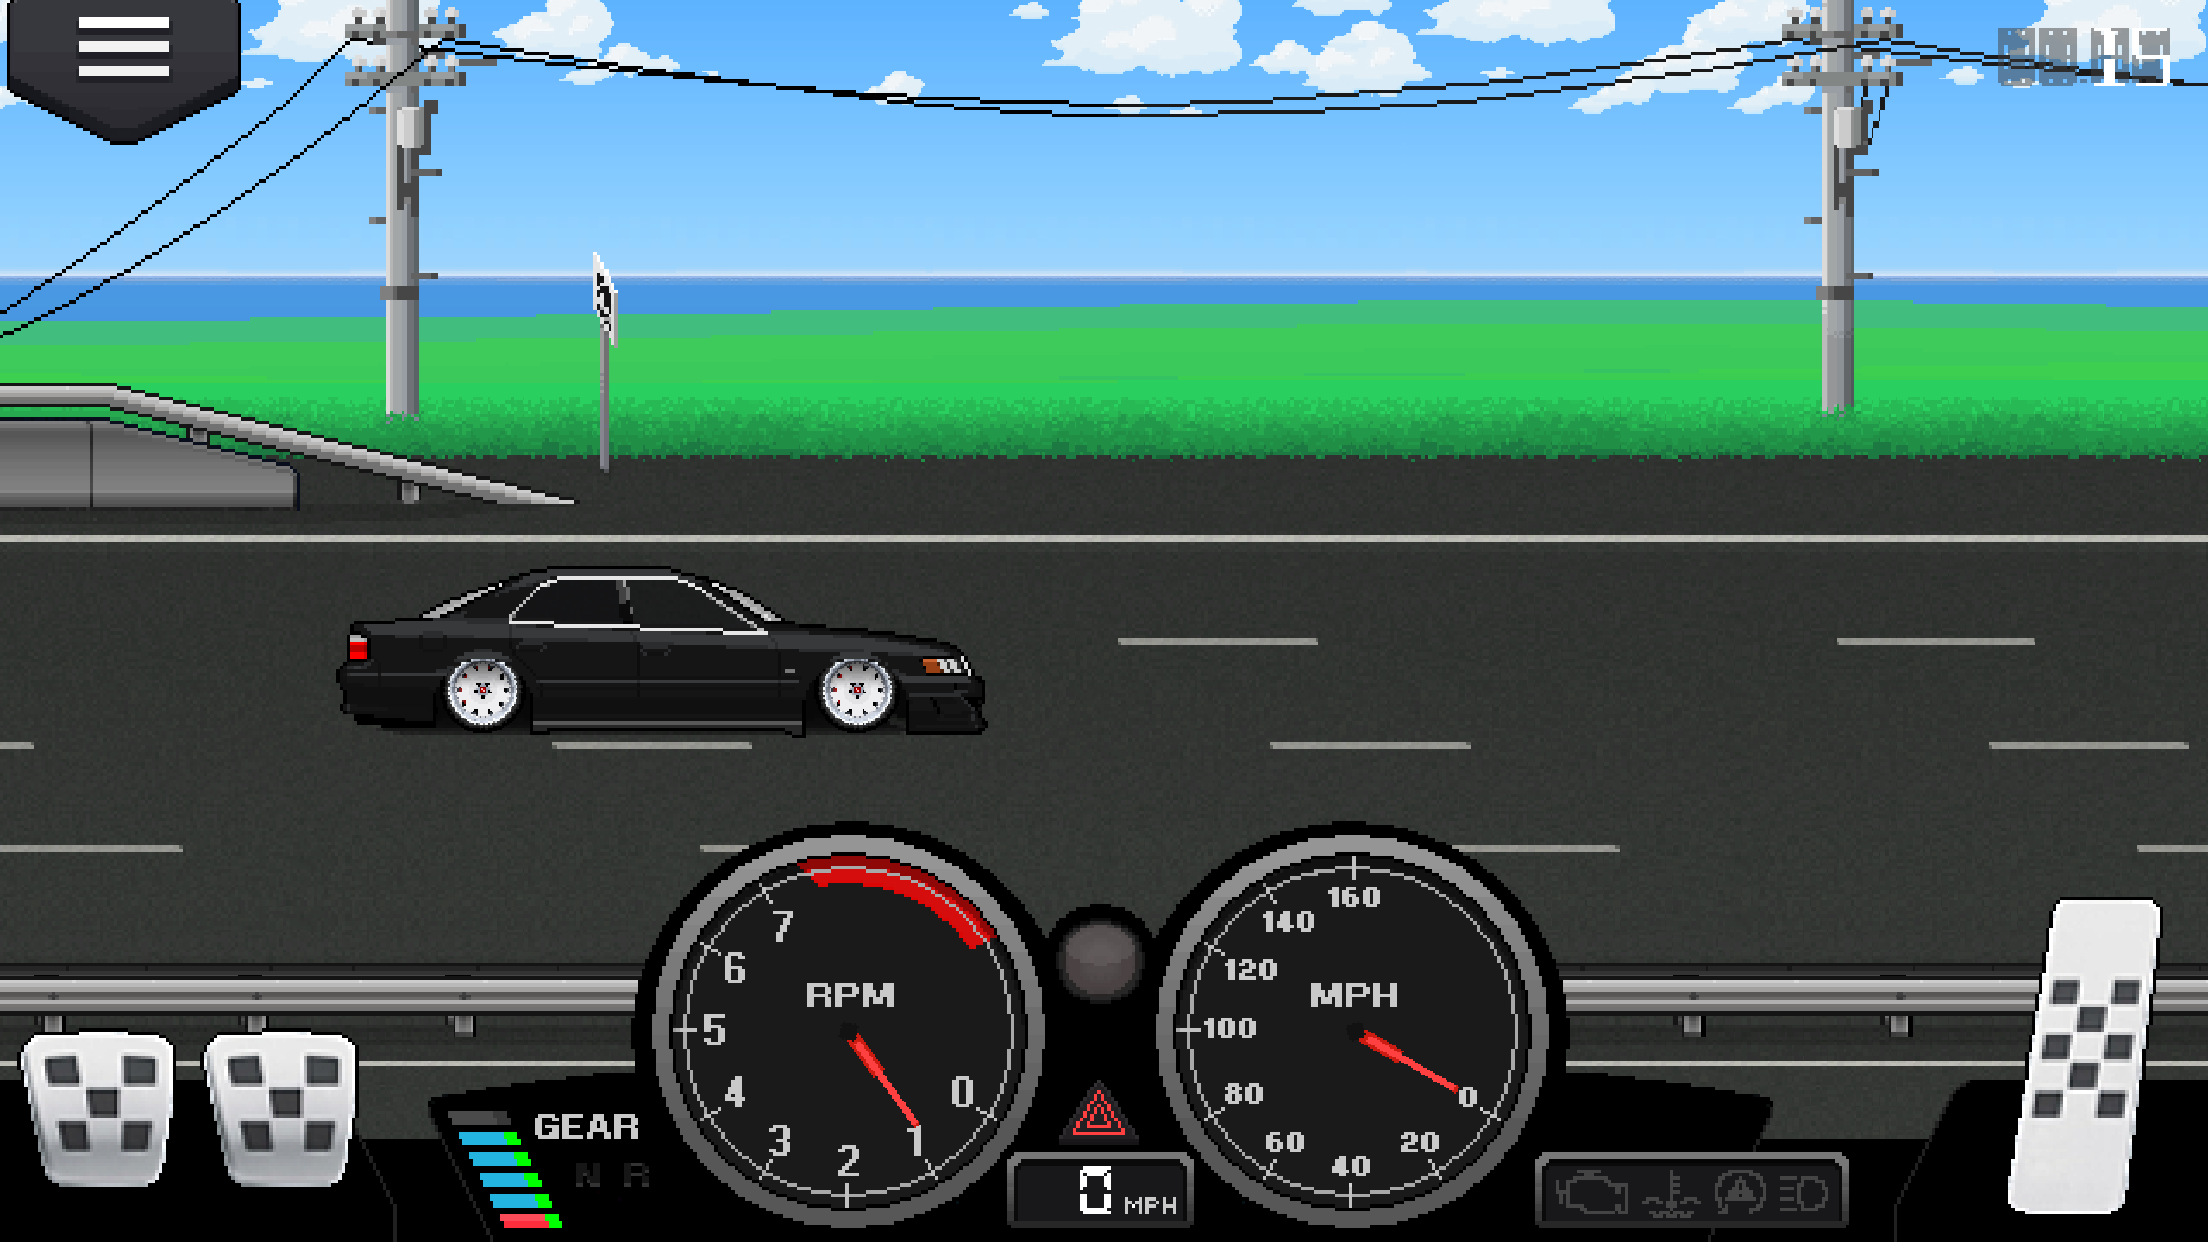 View the Indie DB Pixel Car Racer image Image 8.